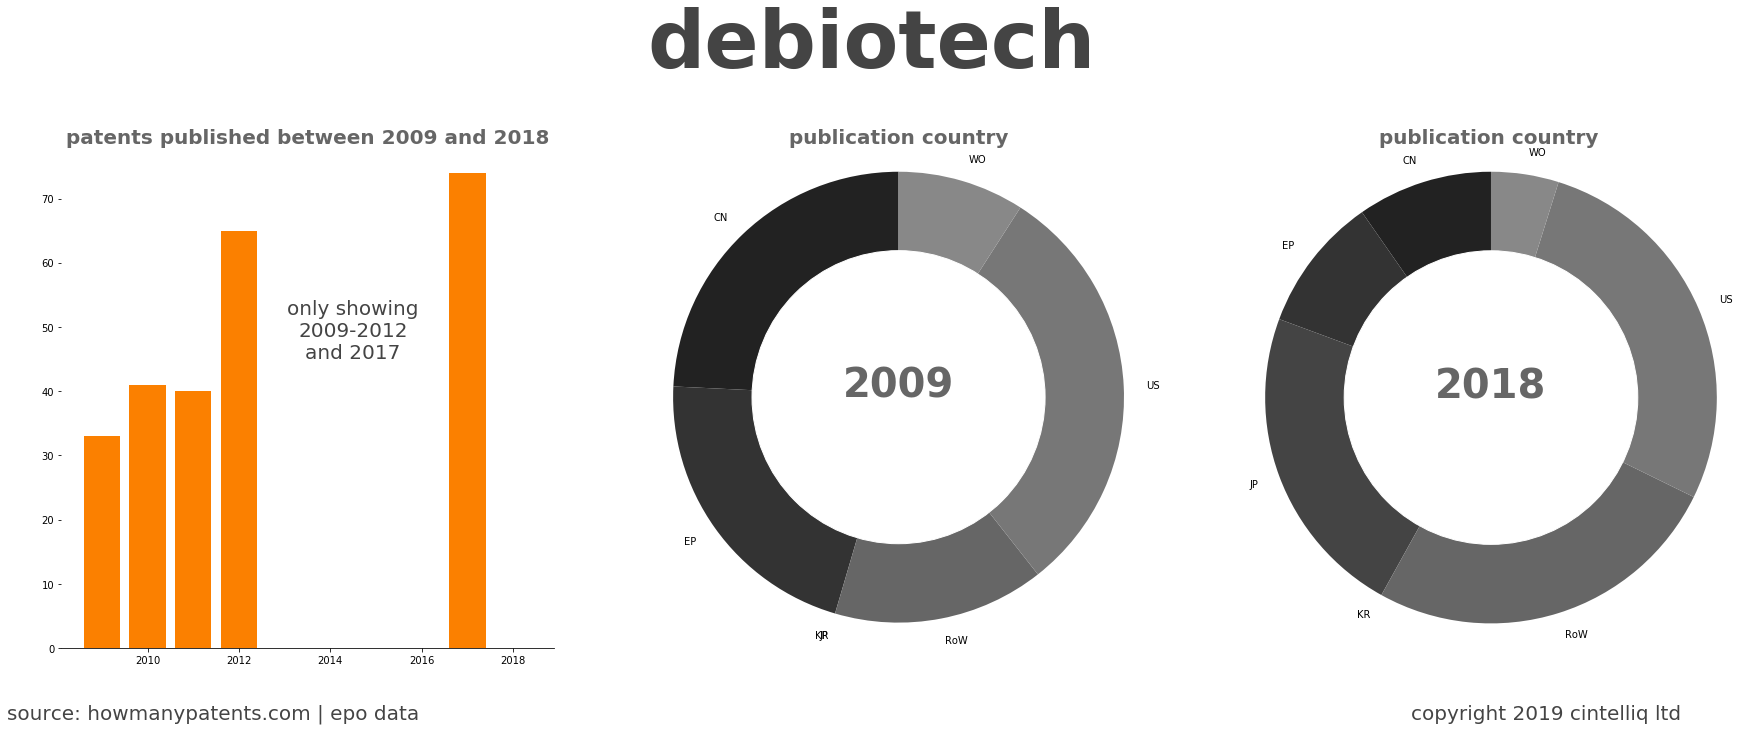 summary of patents for Debiotech